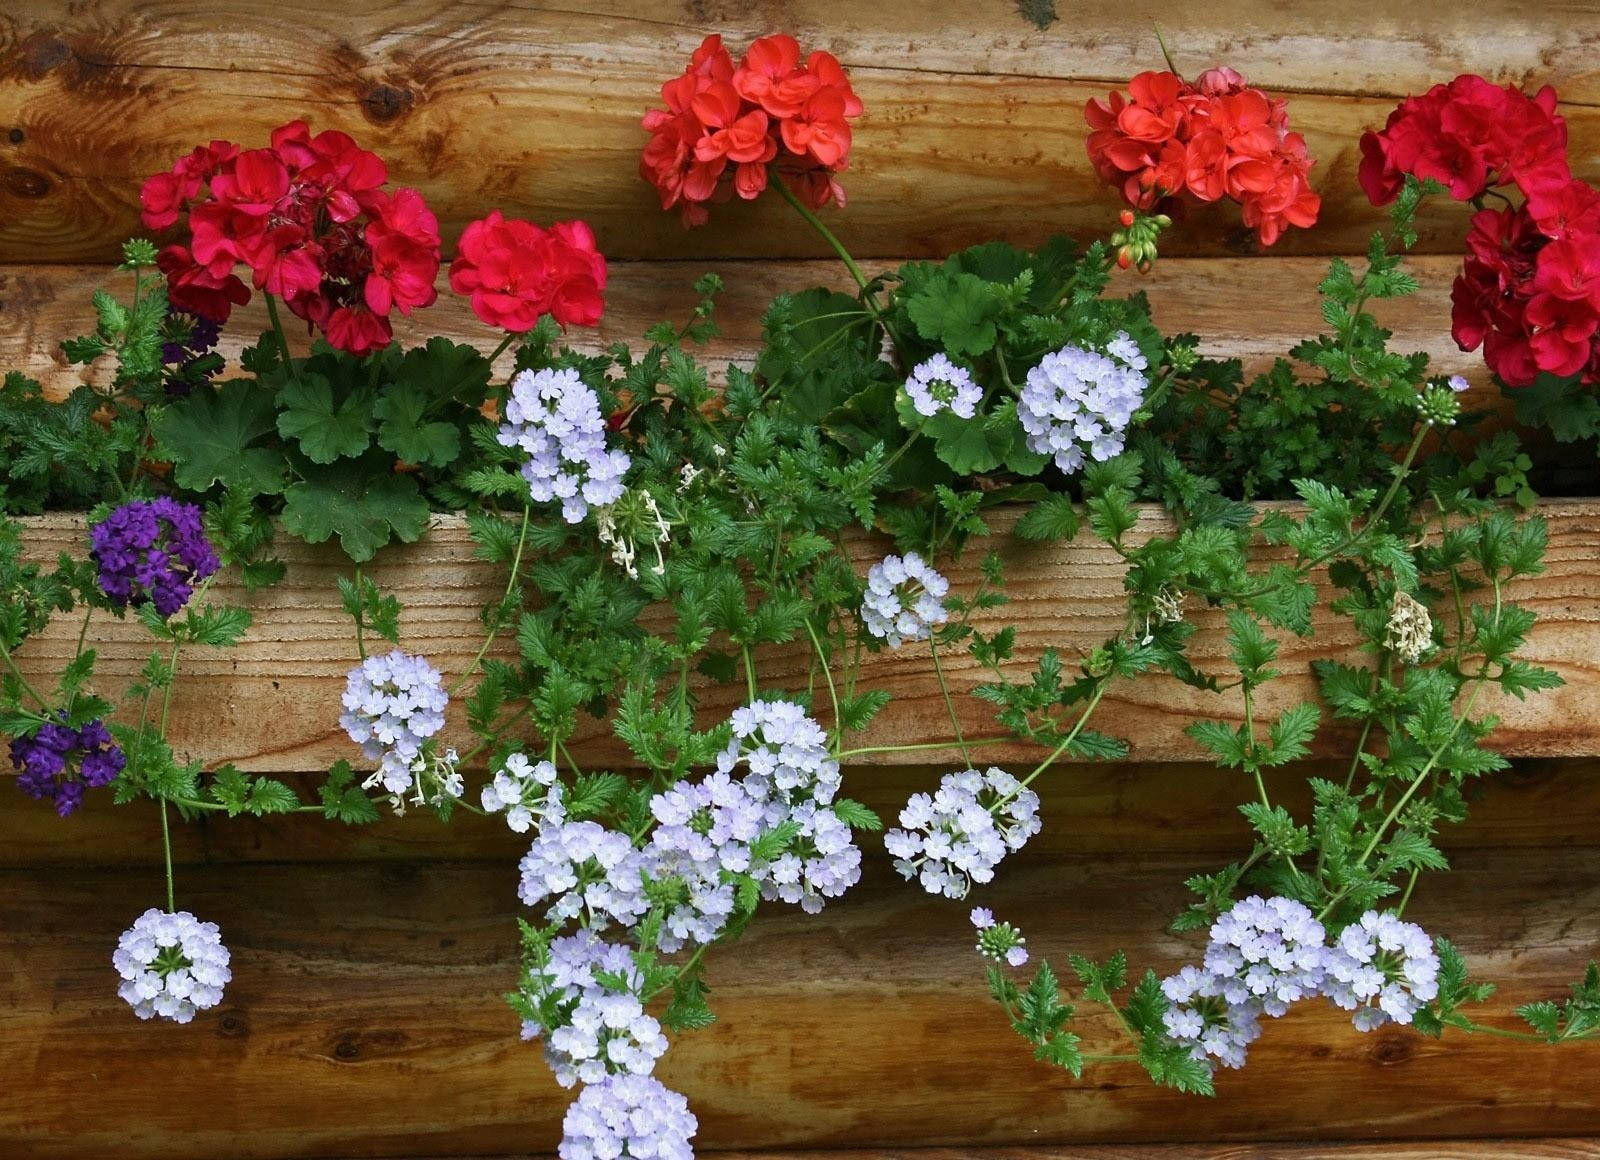 Red And White Flowers In Wooden Container Wallpaper